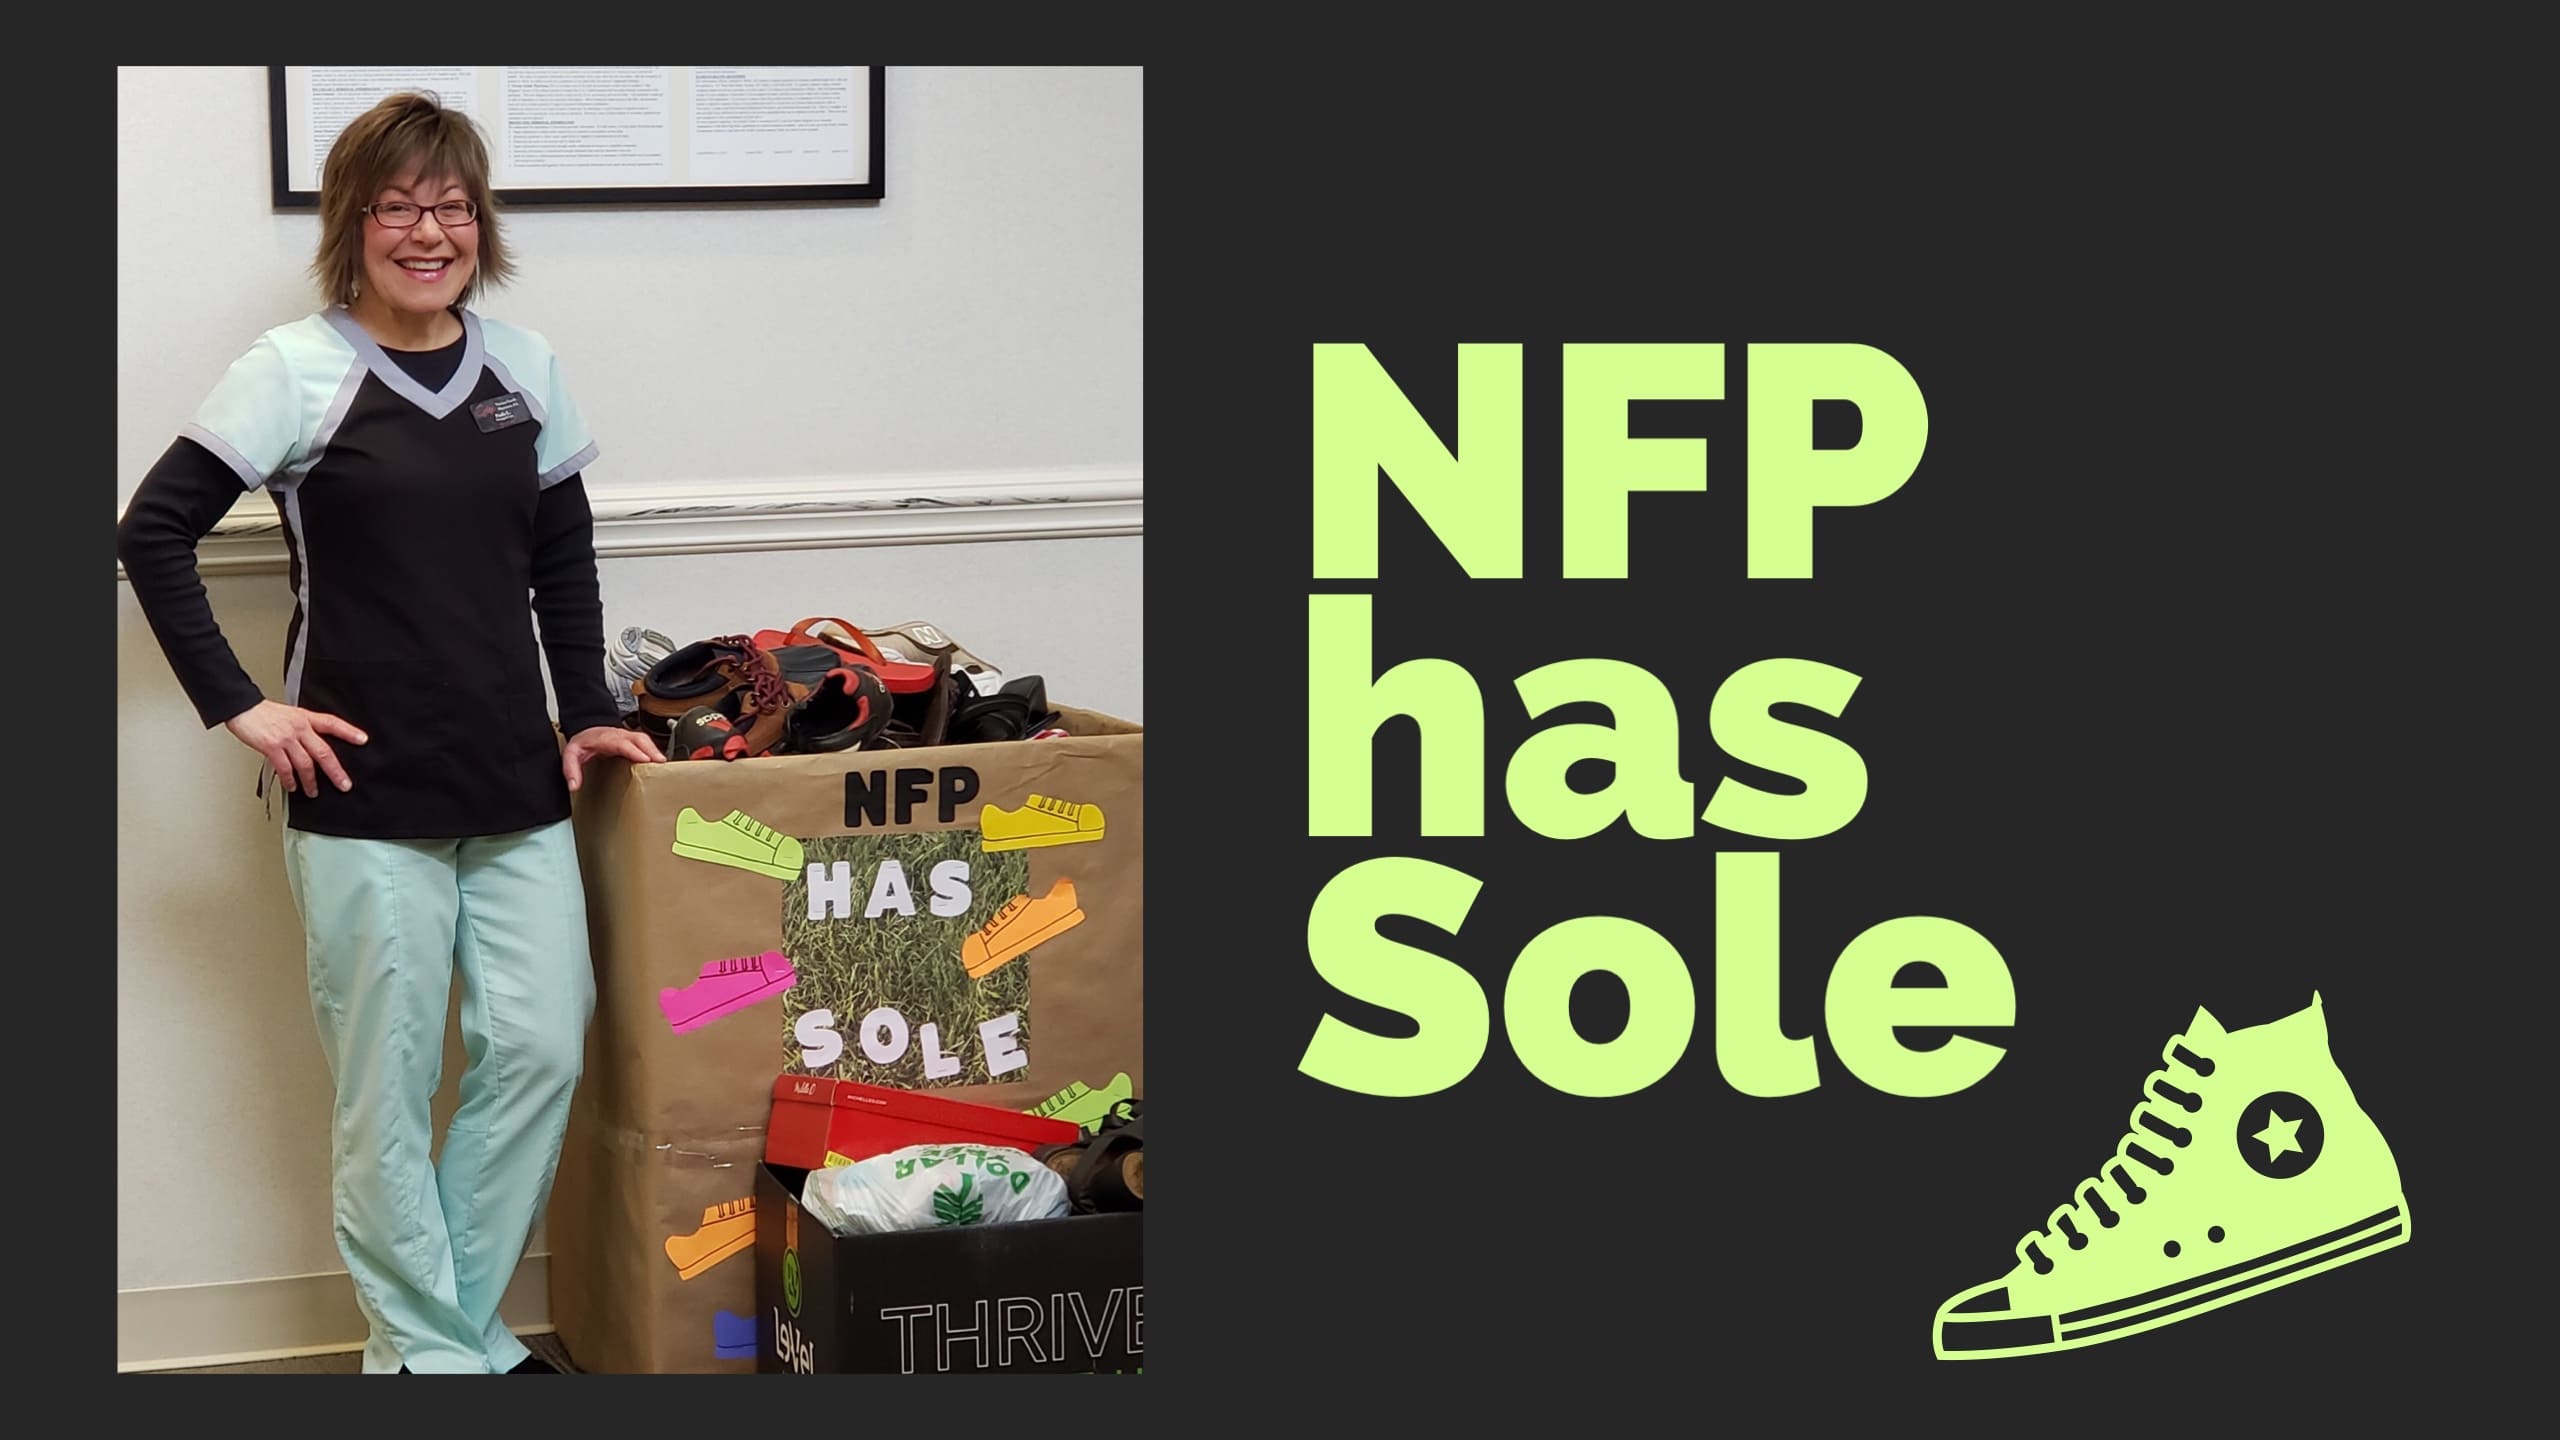 NFP HAS SOLE